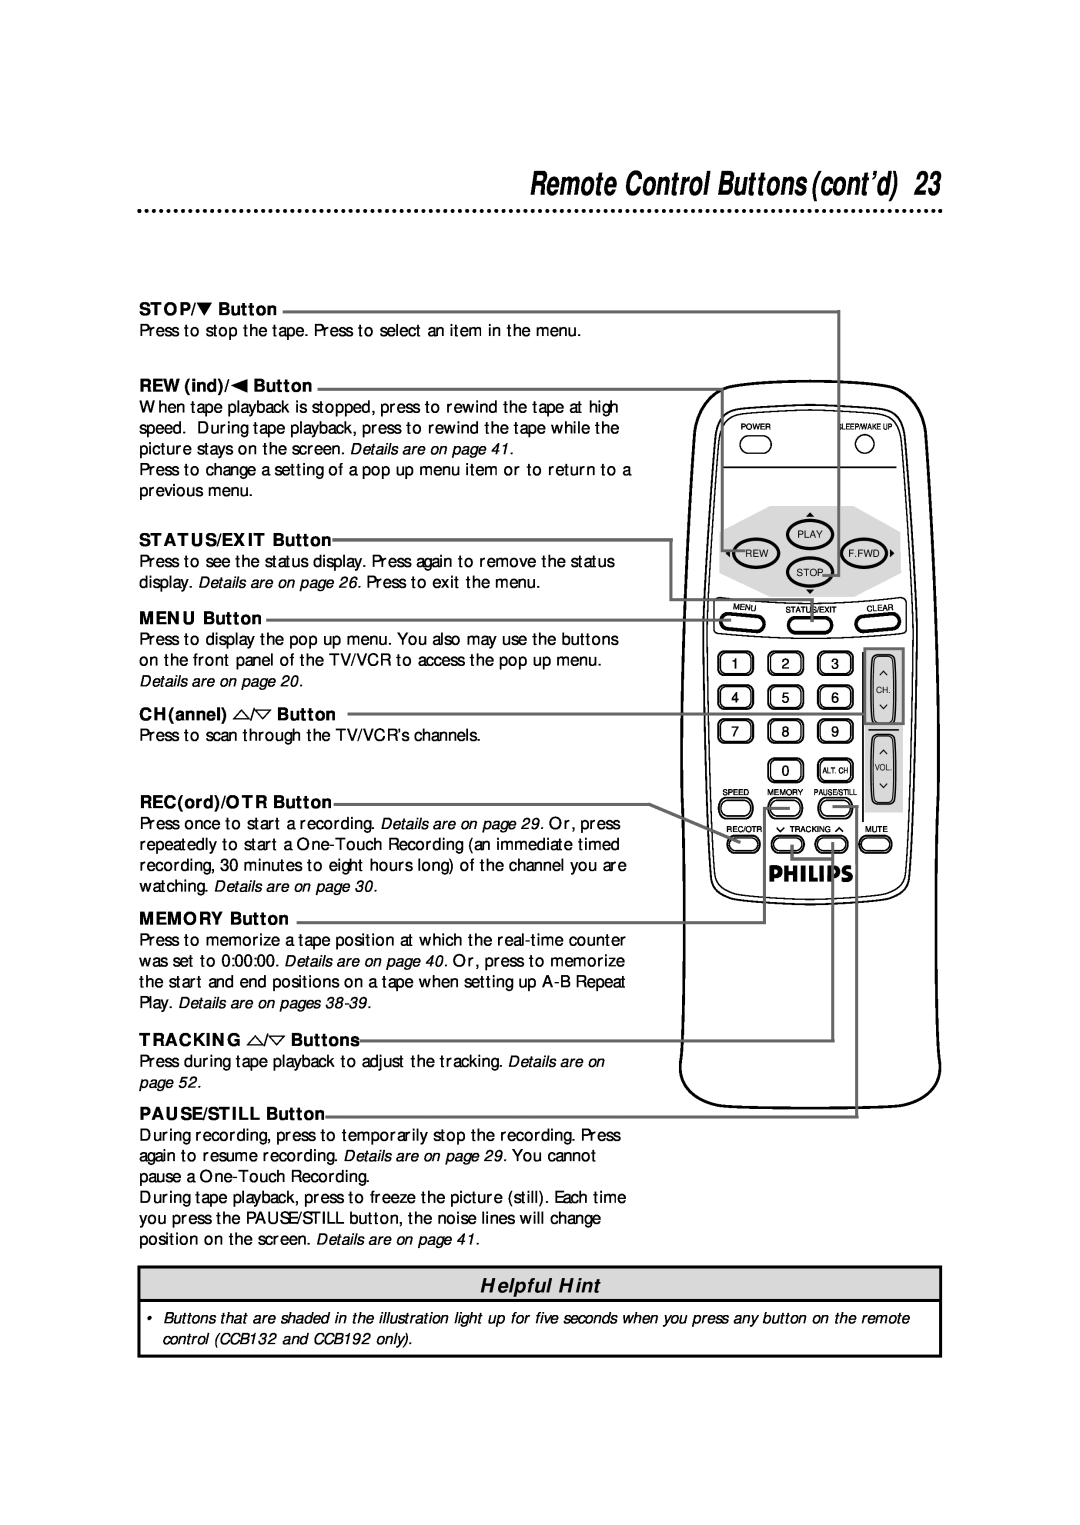 Philips CCB190AT, CCB 132AT, CCB 192AT Remote Control Buttons cont’d, Helpful Hint, watching. Details are on page 